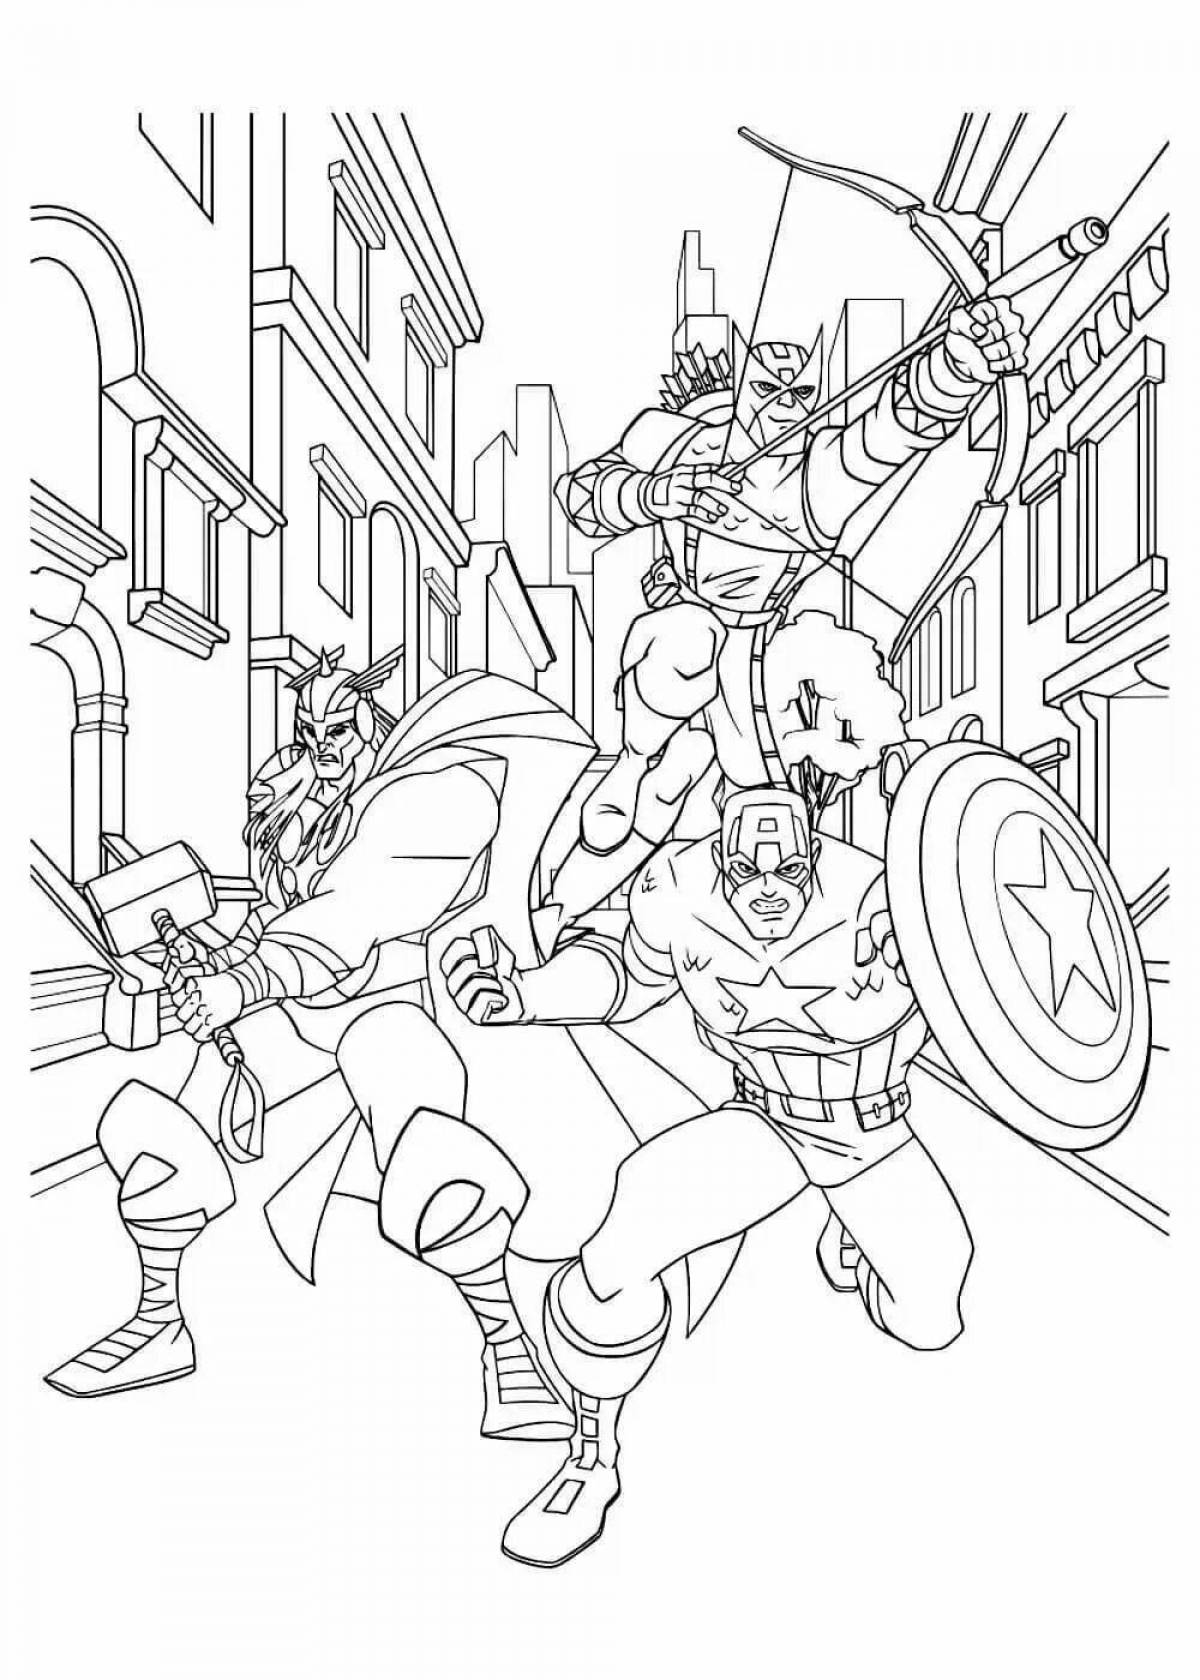 Avengers colorful coloring book